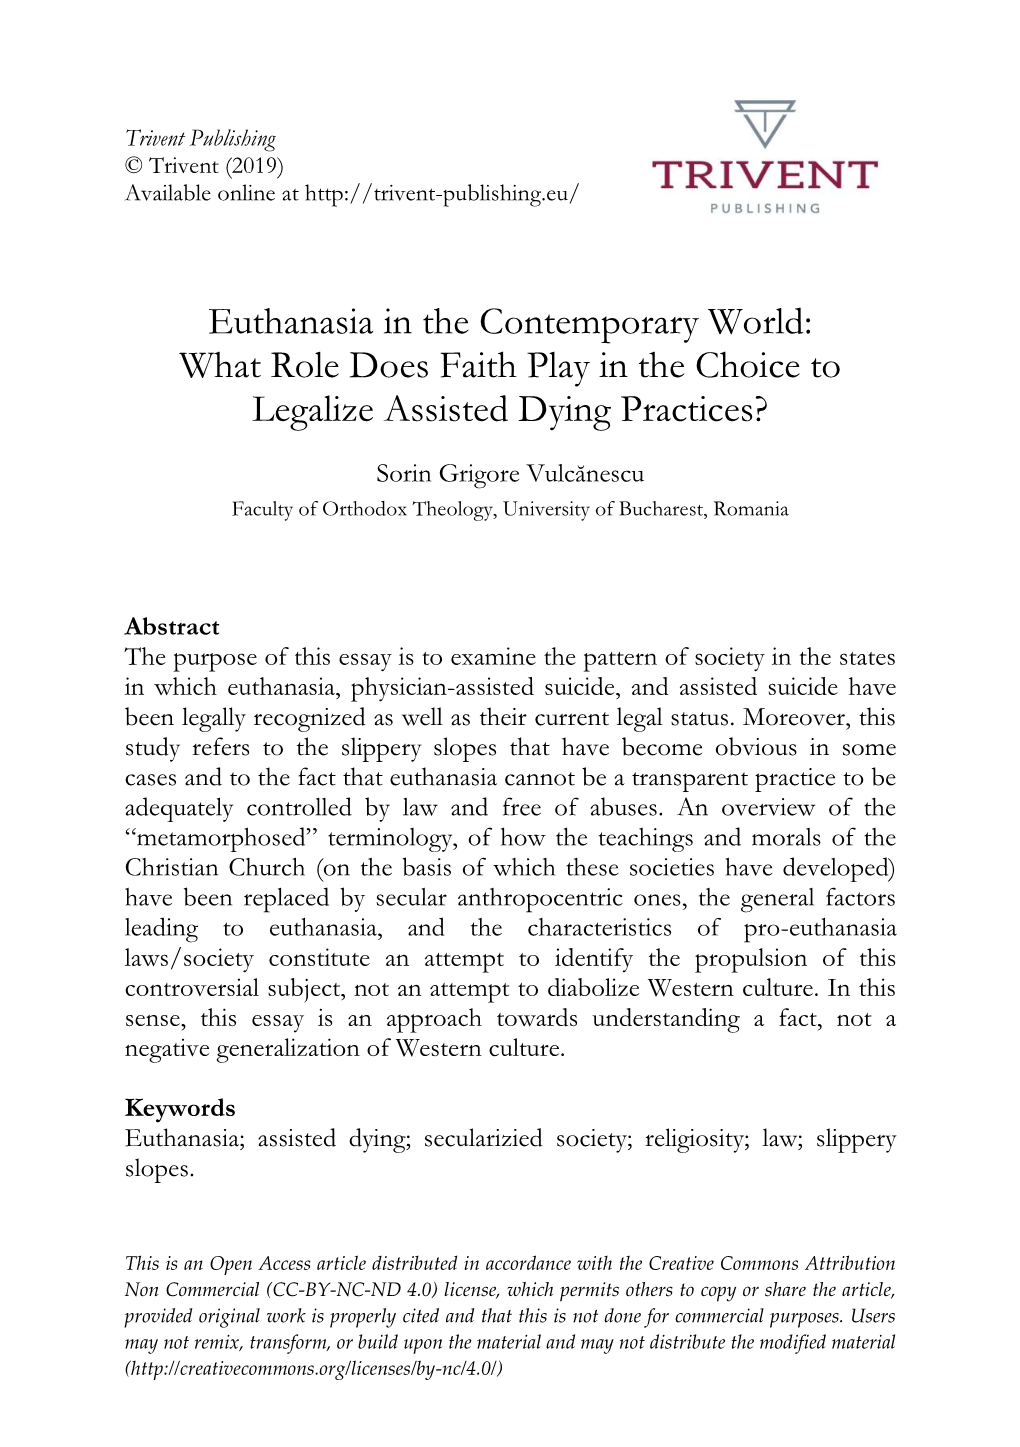 Euthanasia in the Contemporary World: What Role Does Faith Play in the Choice to Legalize Assisted Dying Practices?